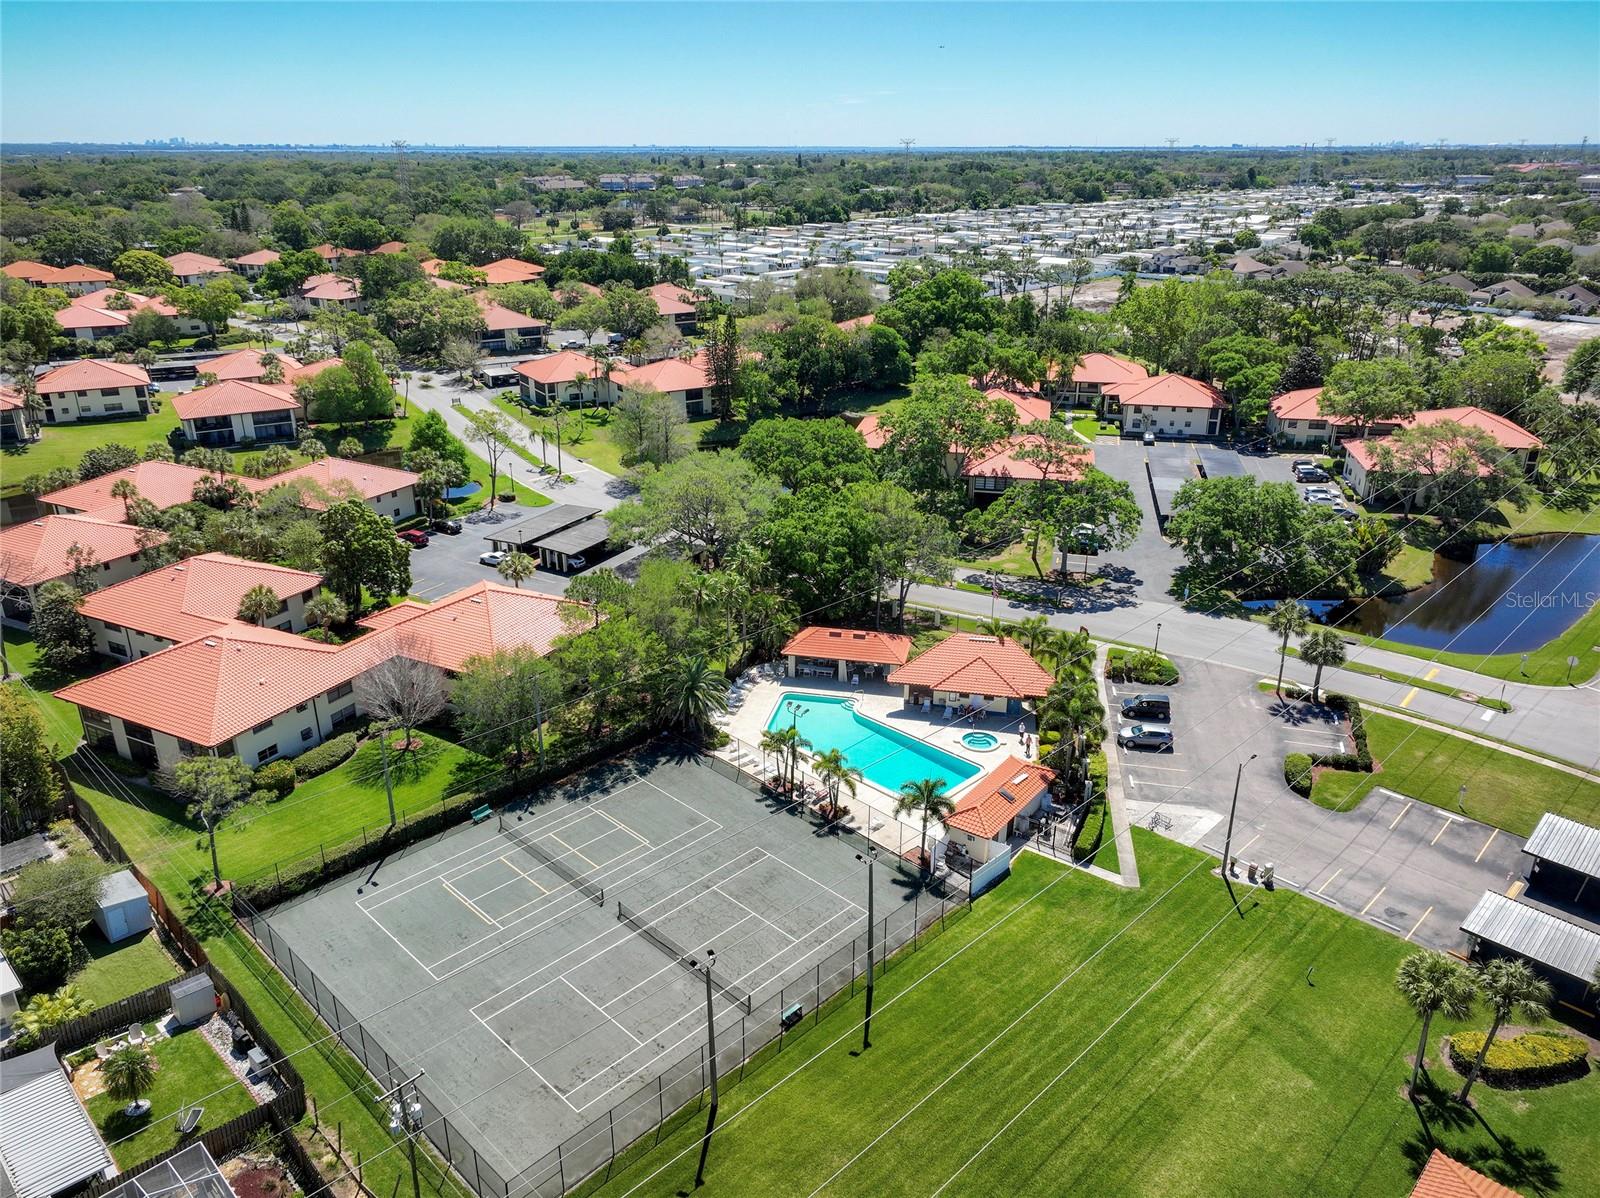 Community Pool and tennis